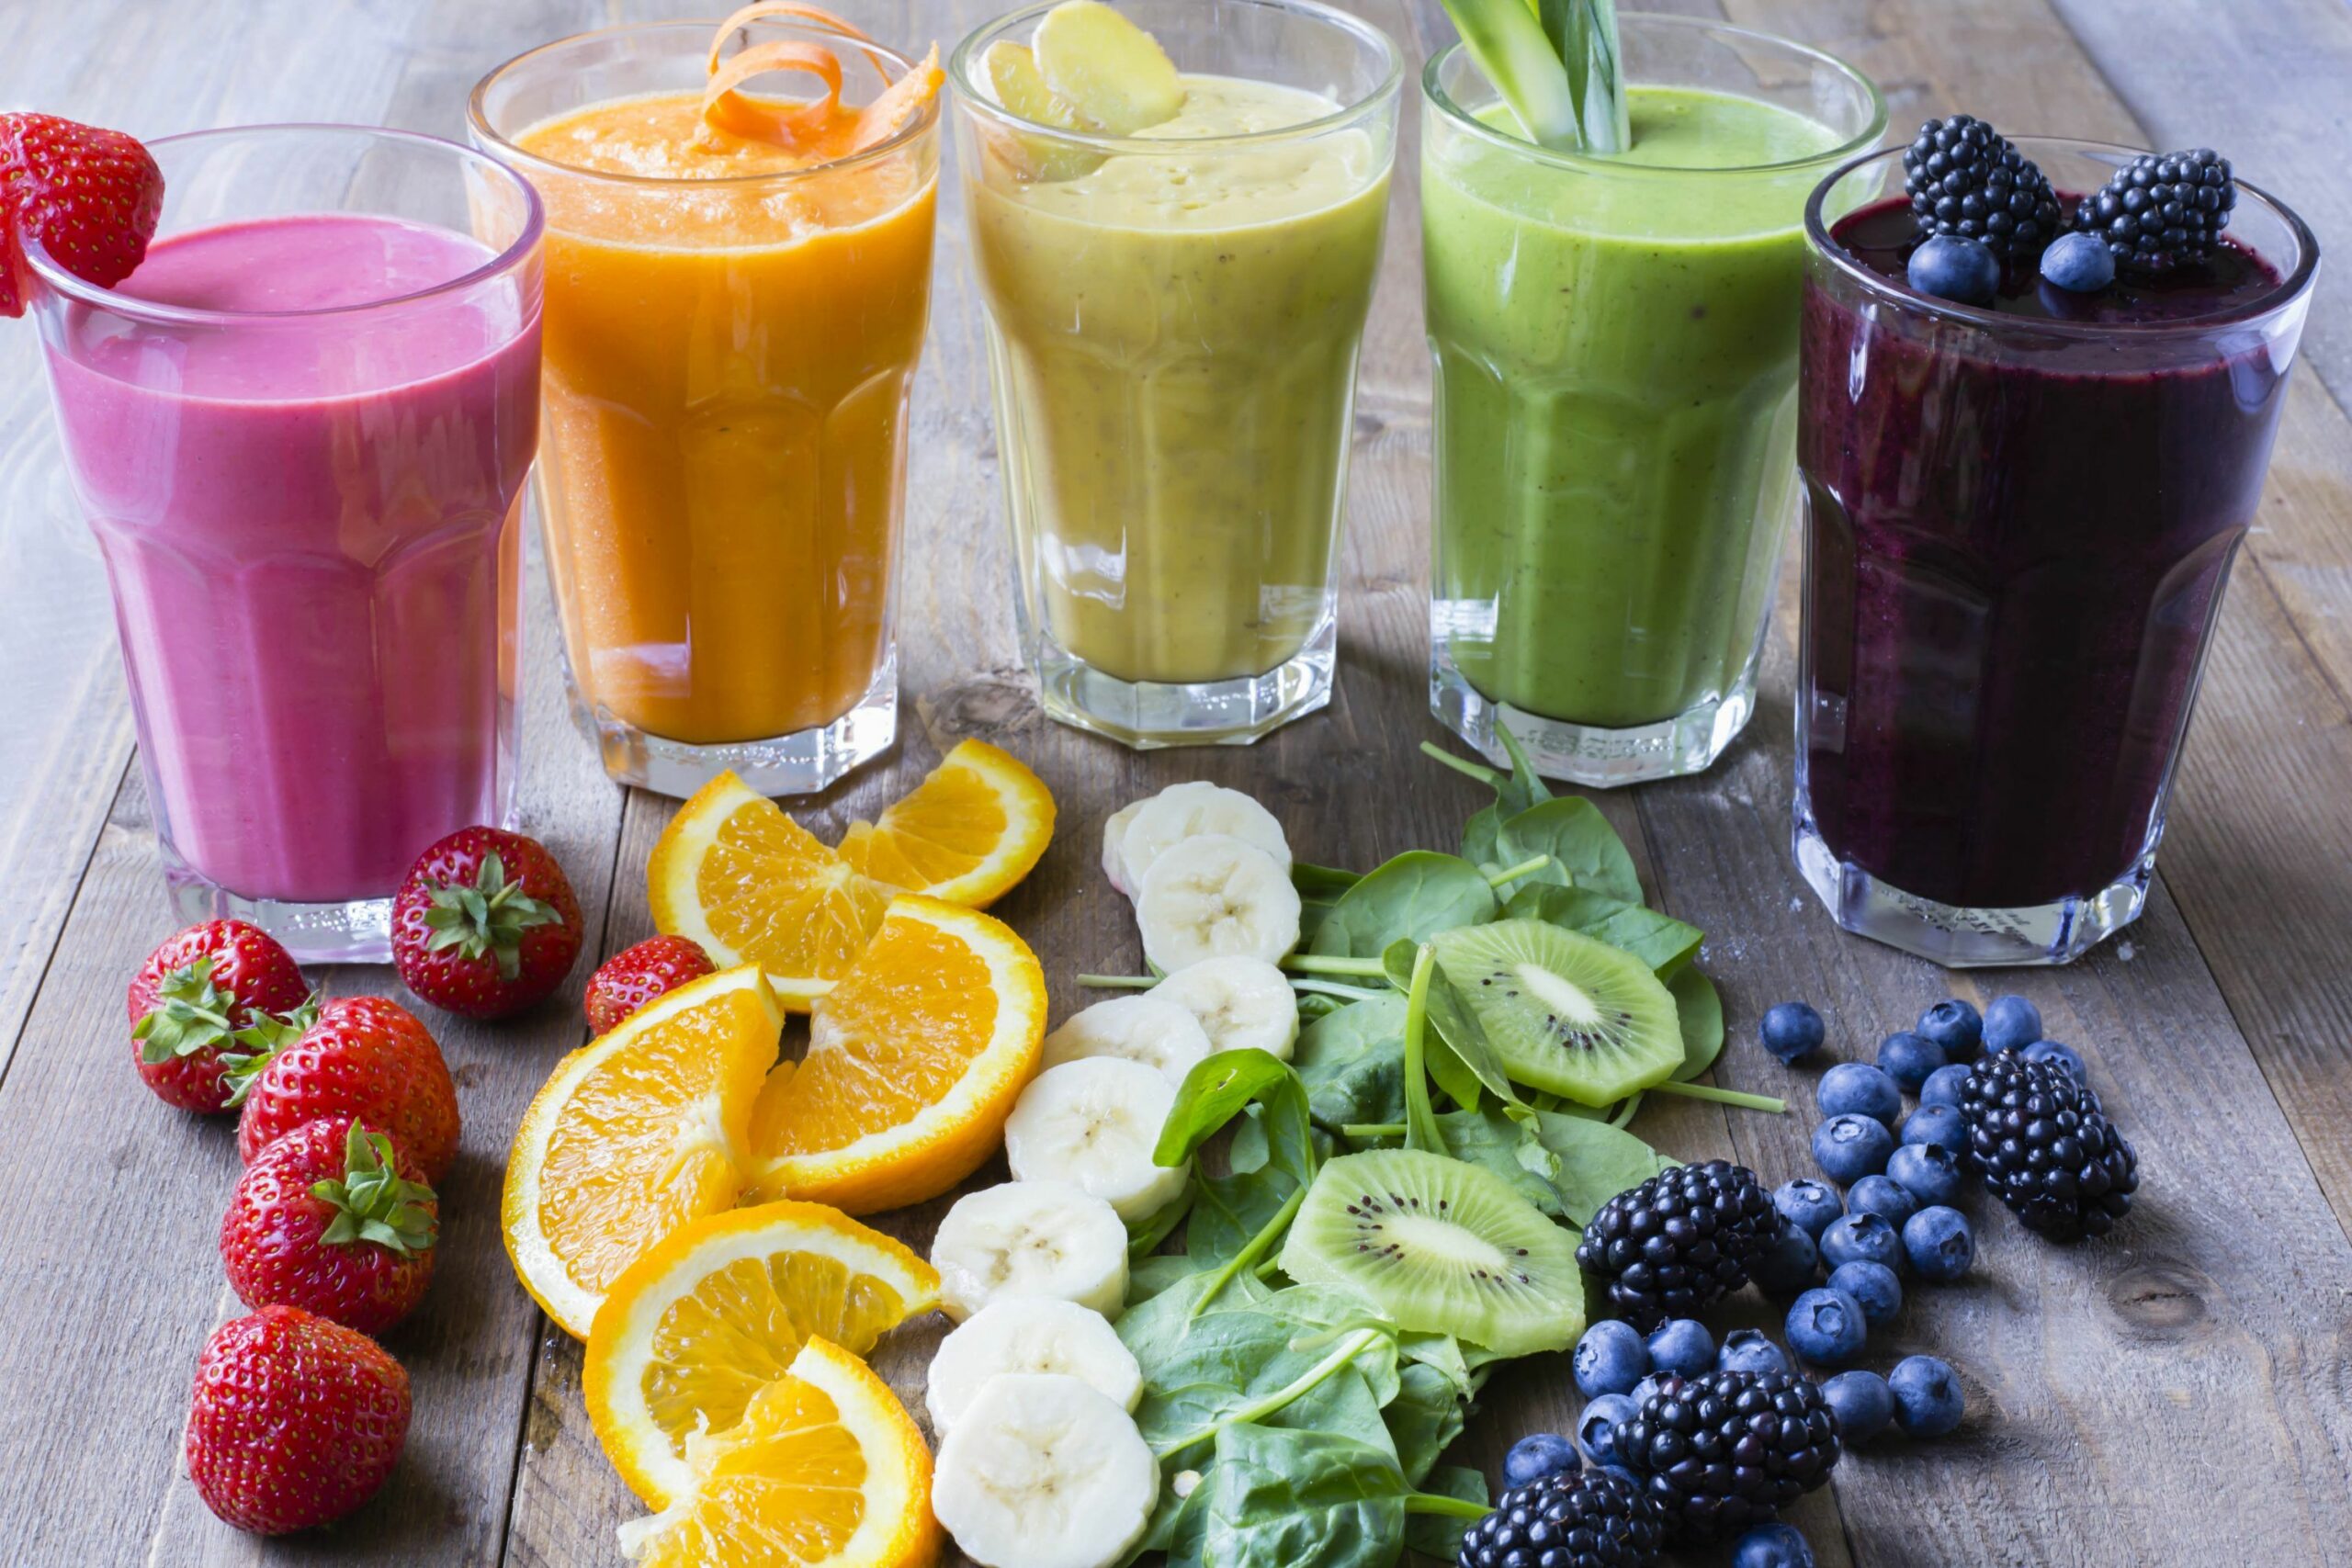 Are Smoothies Good for You?